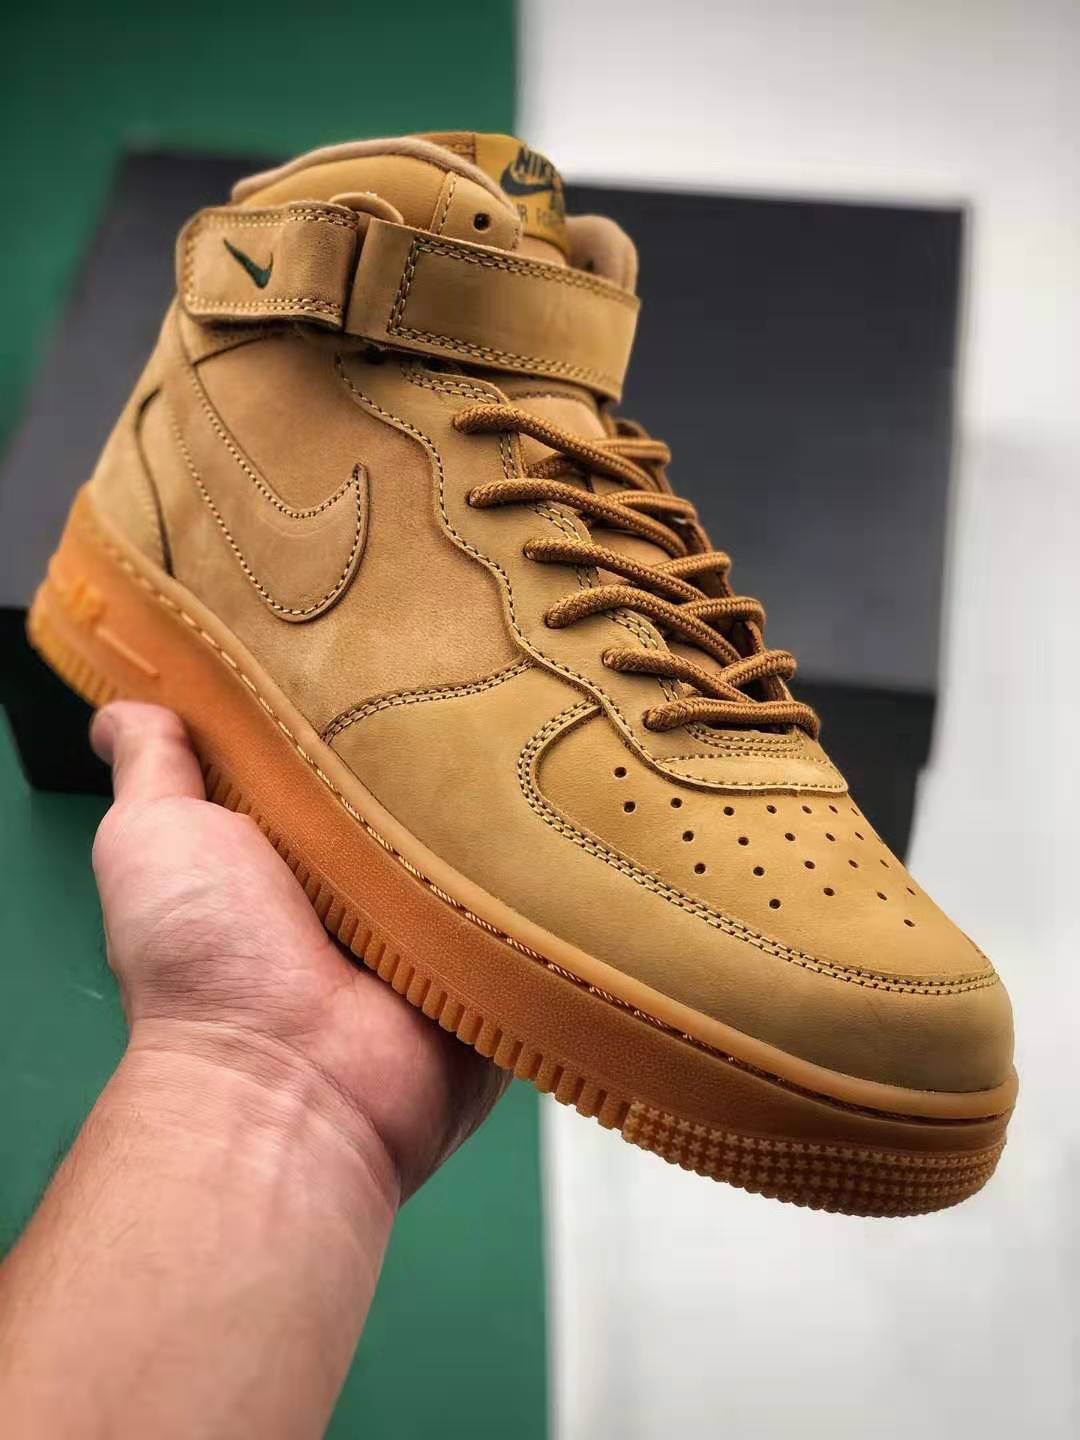 Nike Air Force 1 Mid Flax 715889-200 - Shop Latest Styles Online